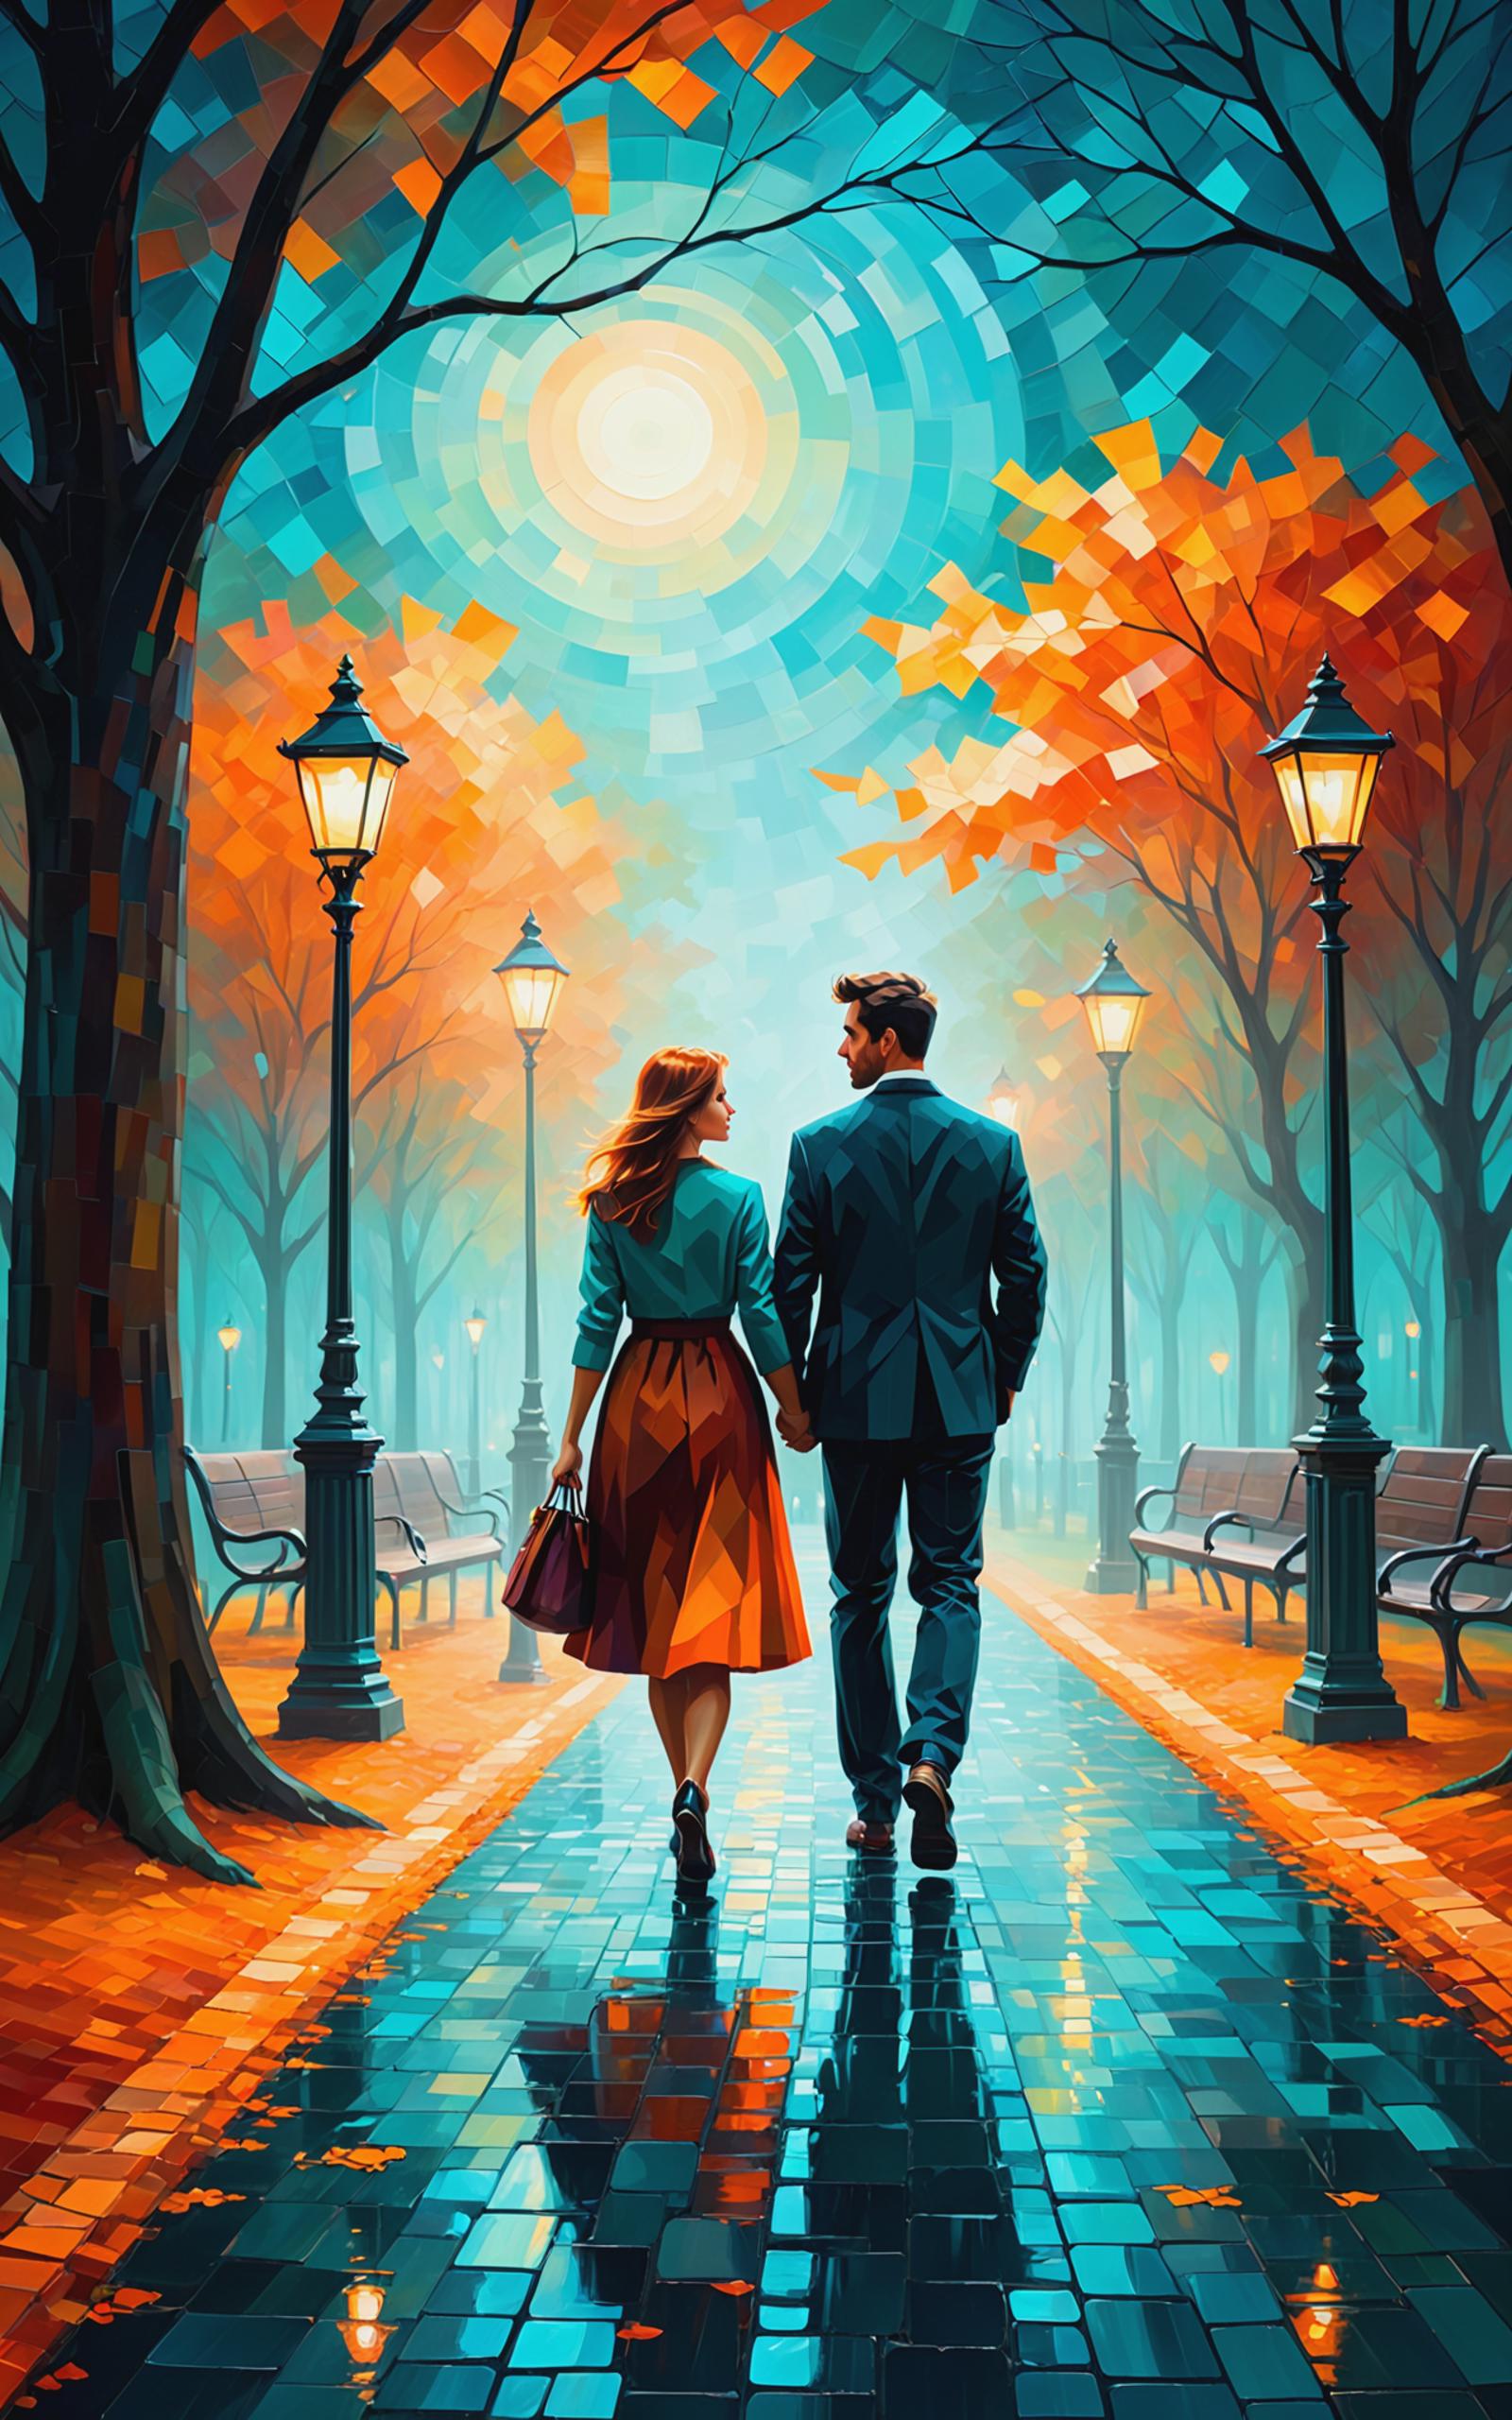 A man and a woman walking down a path in the rain, holding hands, and surrounded by benches and street lamps.